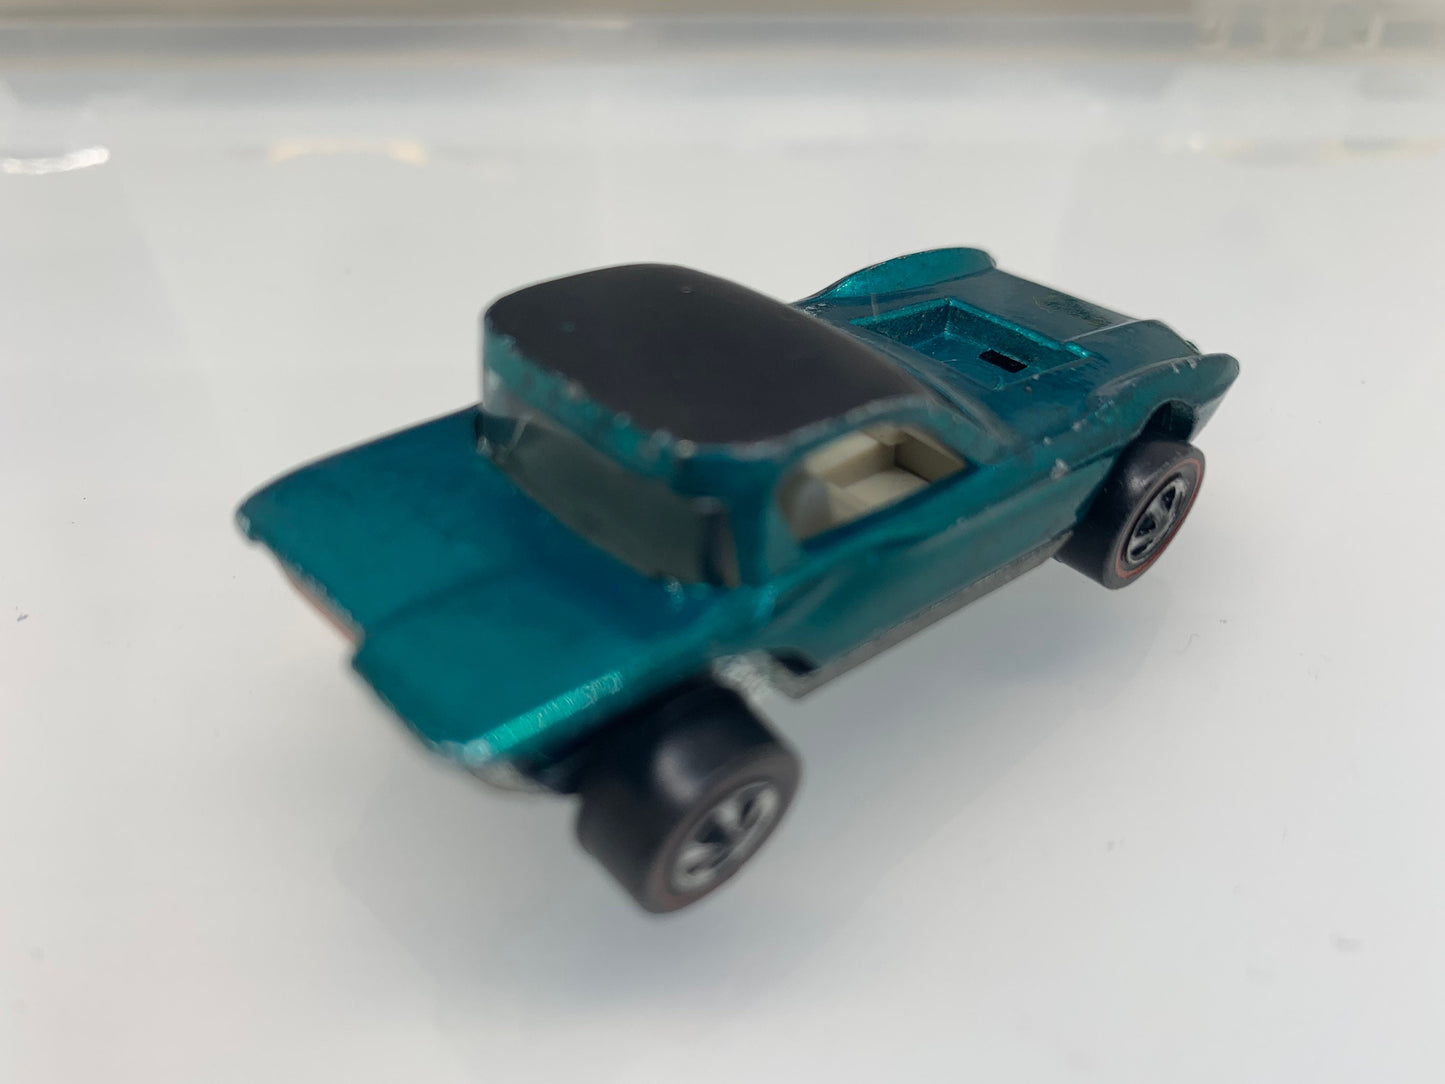 Hot Wheels Redline Python Green - Vintage Diecast Metal Cars - Vintage Collectibles - 1960's Toy Cars - Perfect Birthday Gift